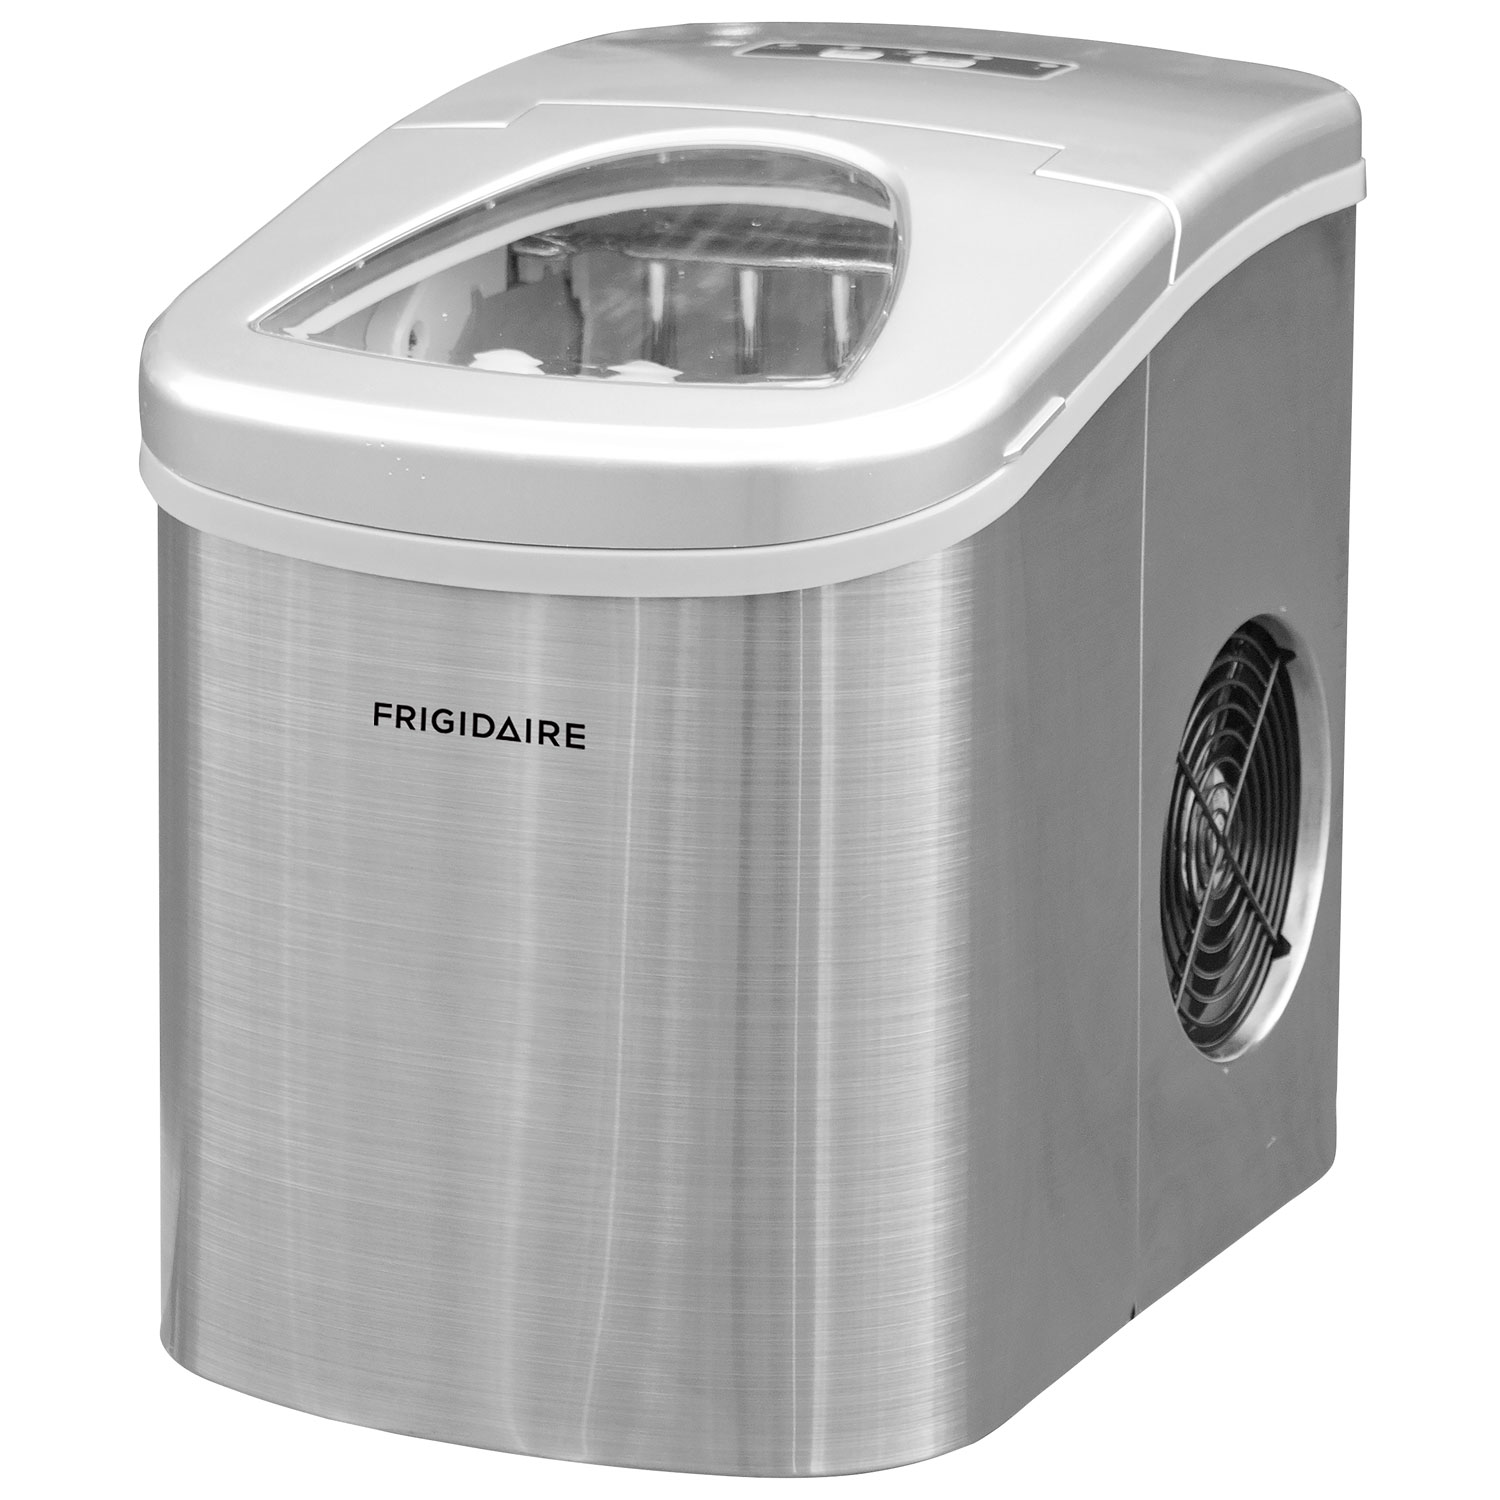 Frigidaire 26 lb. Freestanding Ice Maker (EFIC117) - Stainless Steel